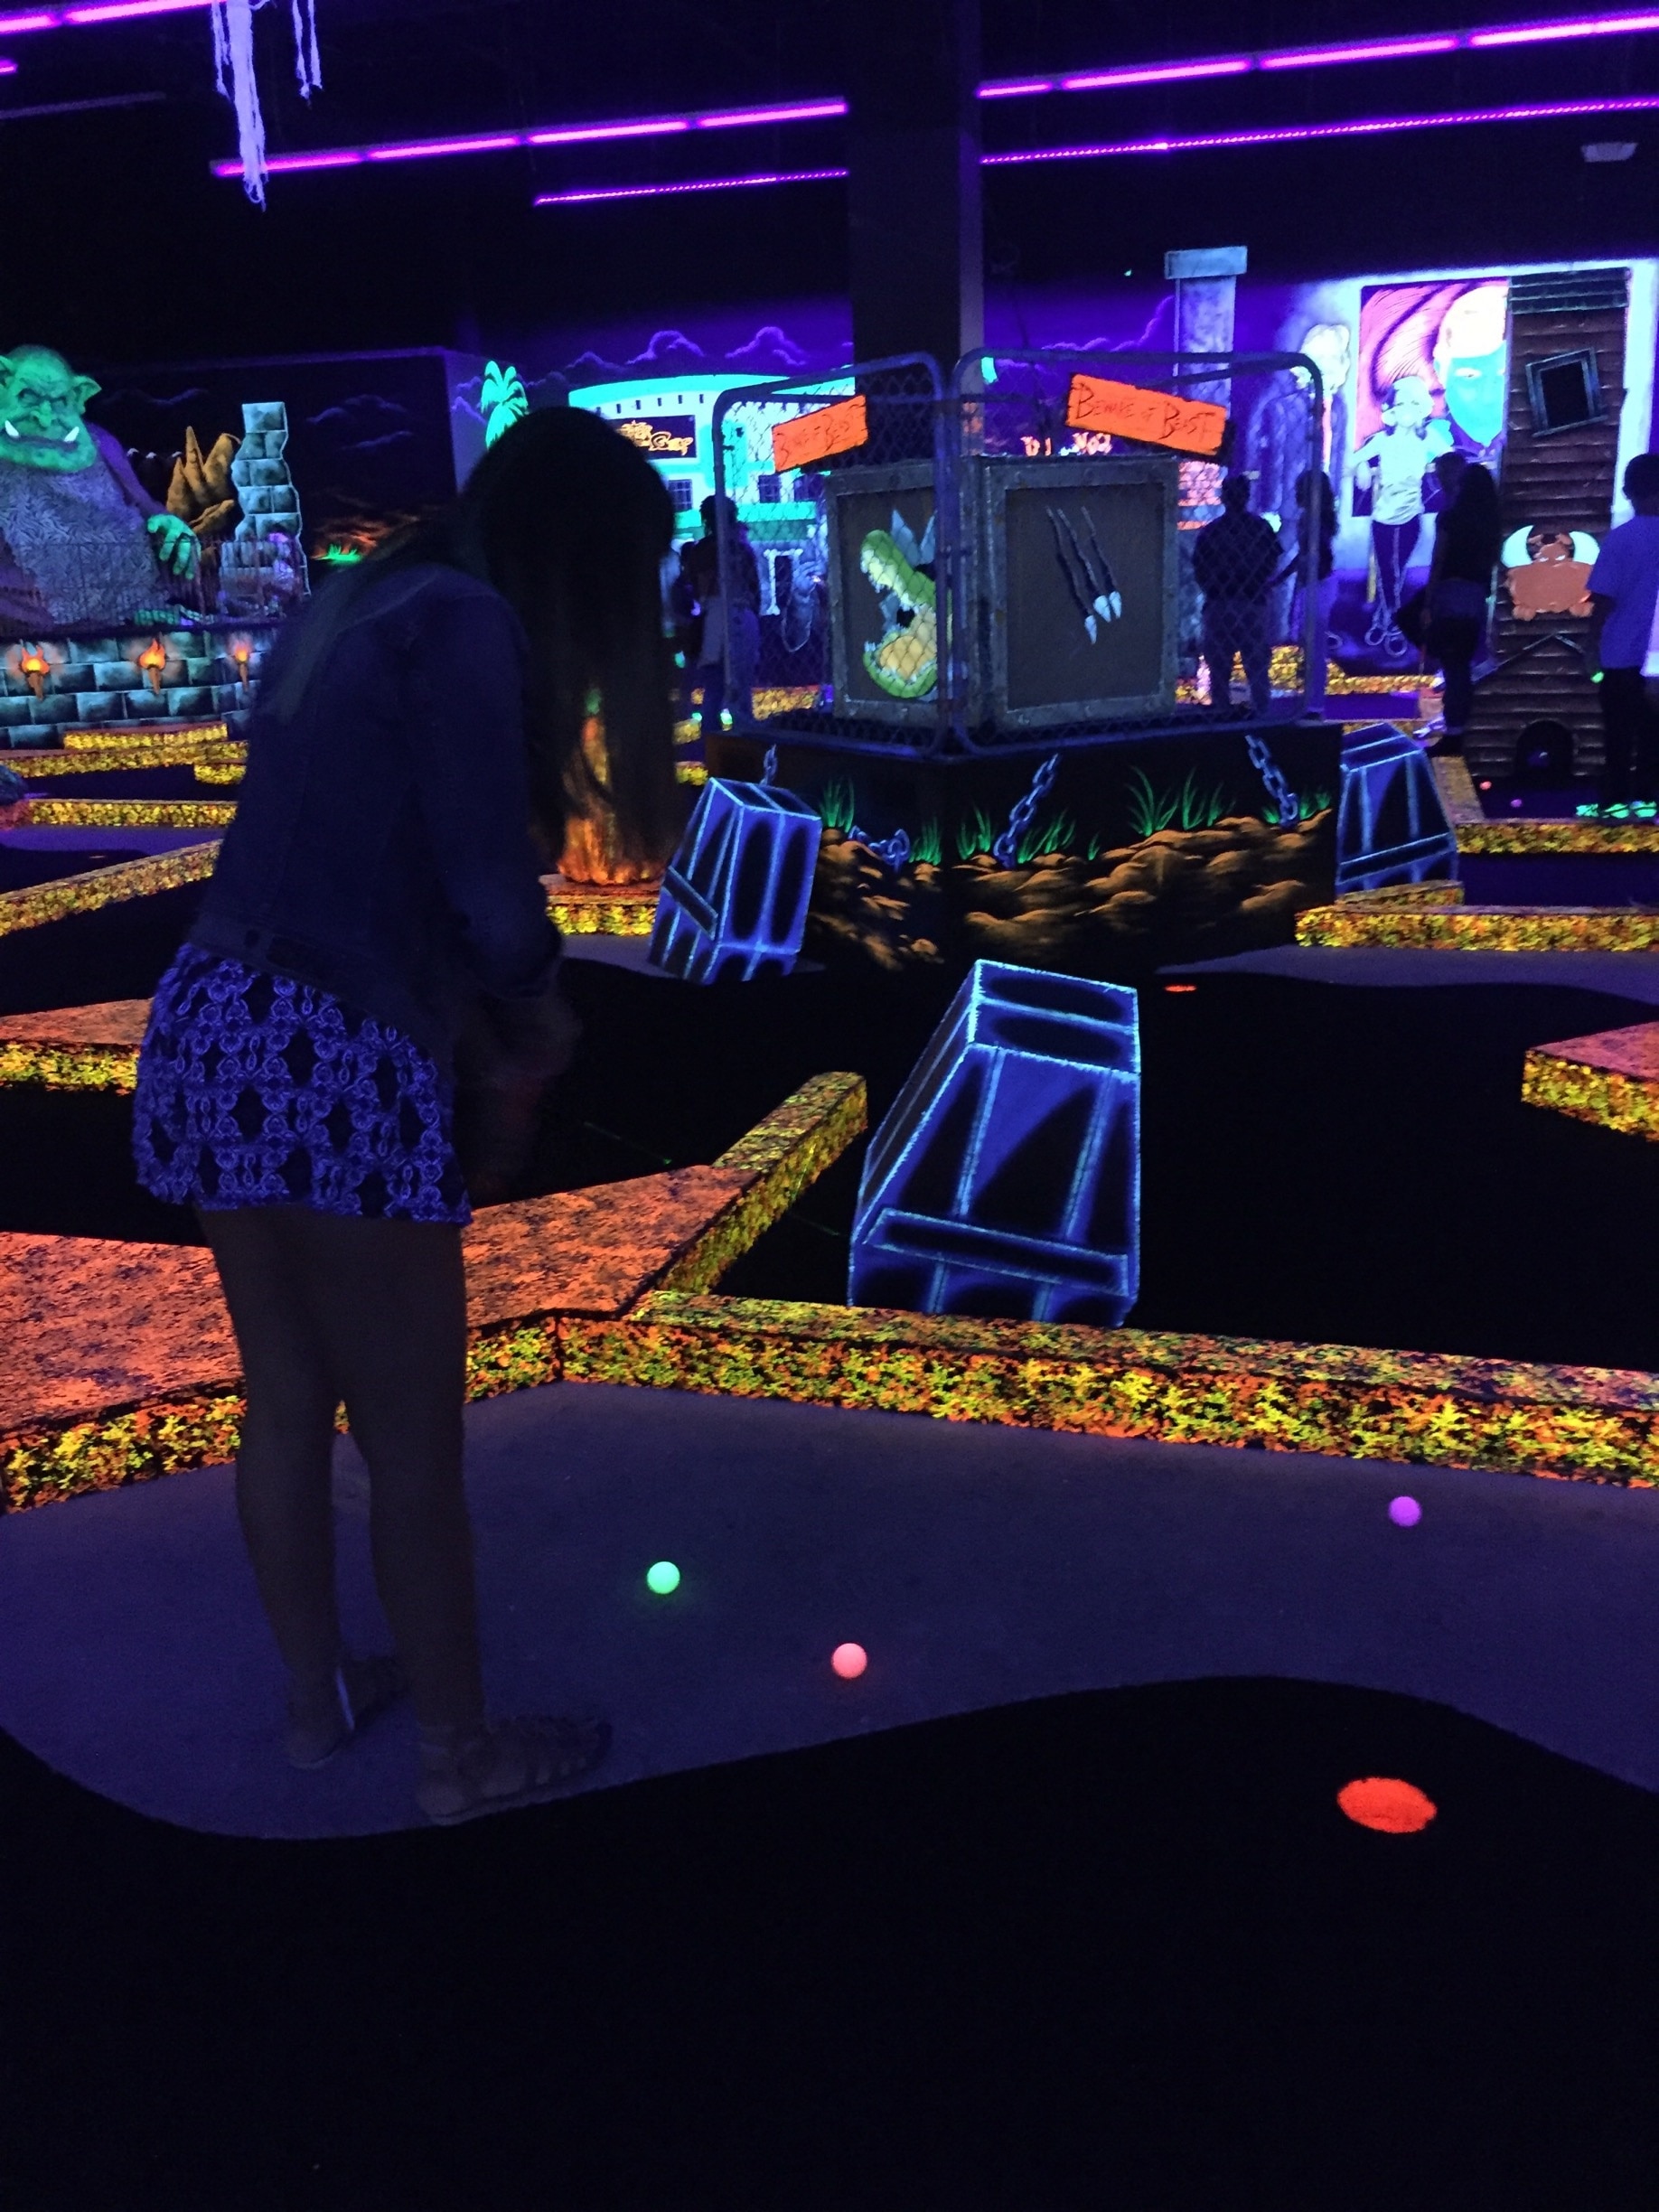 Monster mini golf is an indoor glow-in-the-dark miniature golf place and it's appropriate for everyone of all ages! This place was super fun, and very inexpensive. 